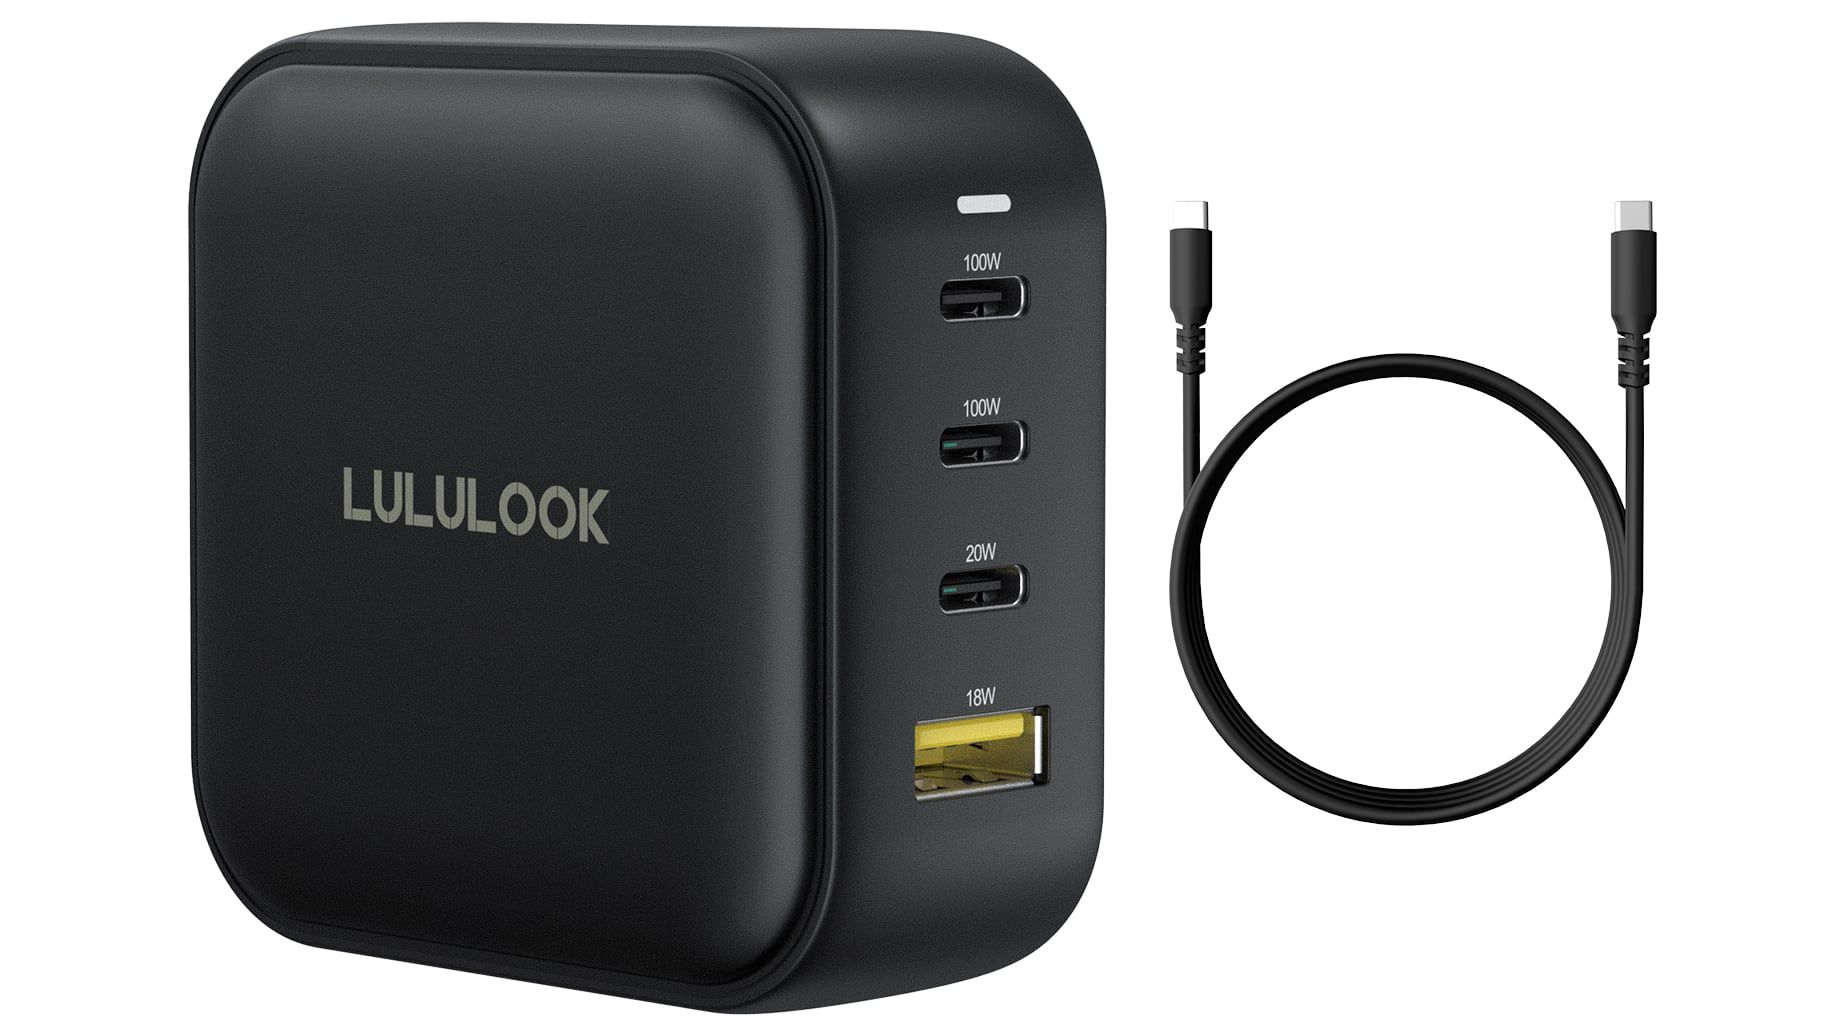 MacRumors Giveaway: Win an iPhone 14 Plus and 100W Multiport USB-C Charger From Lululook - macrumors.com